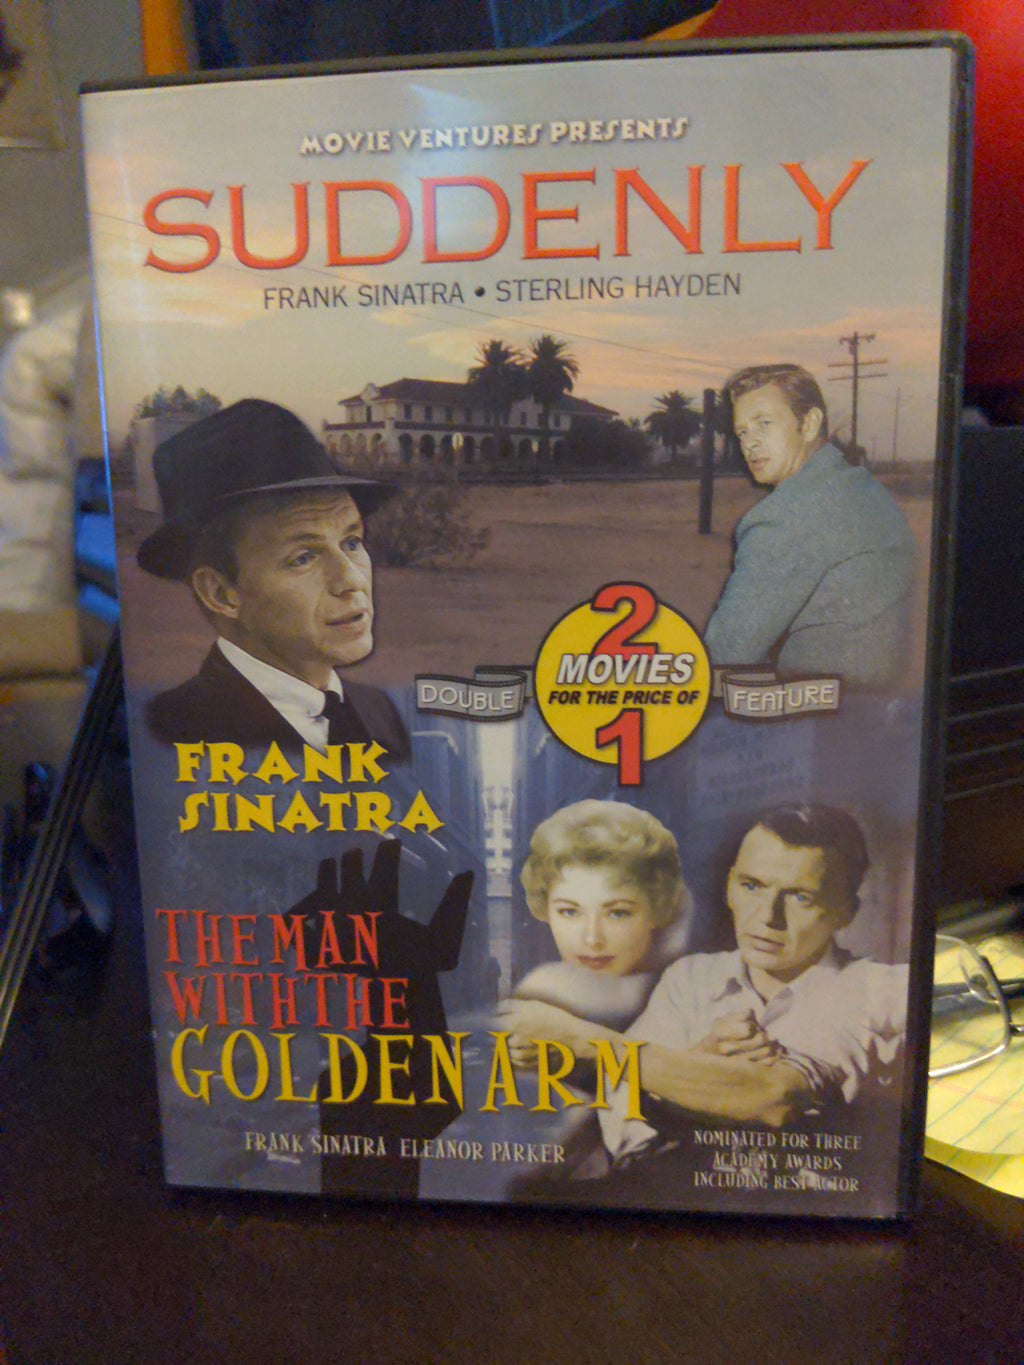 Frank Sinatra Double Feature DVD - Suddenly & The Man With The Golden Arm